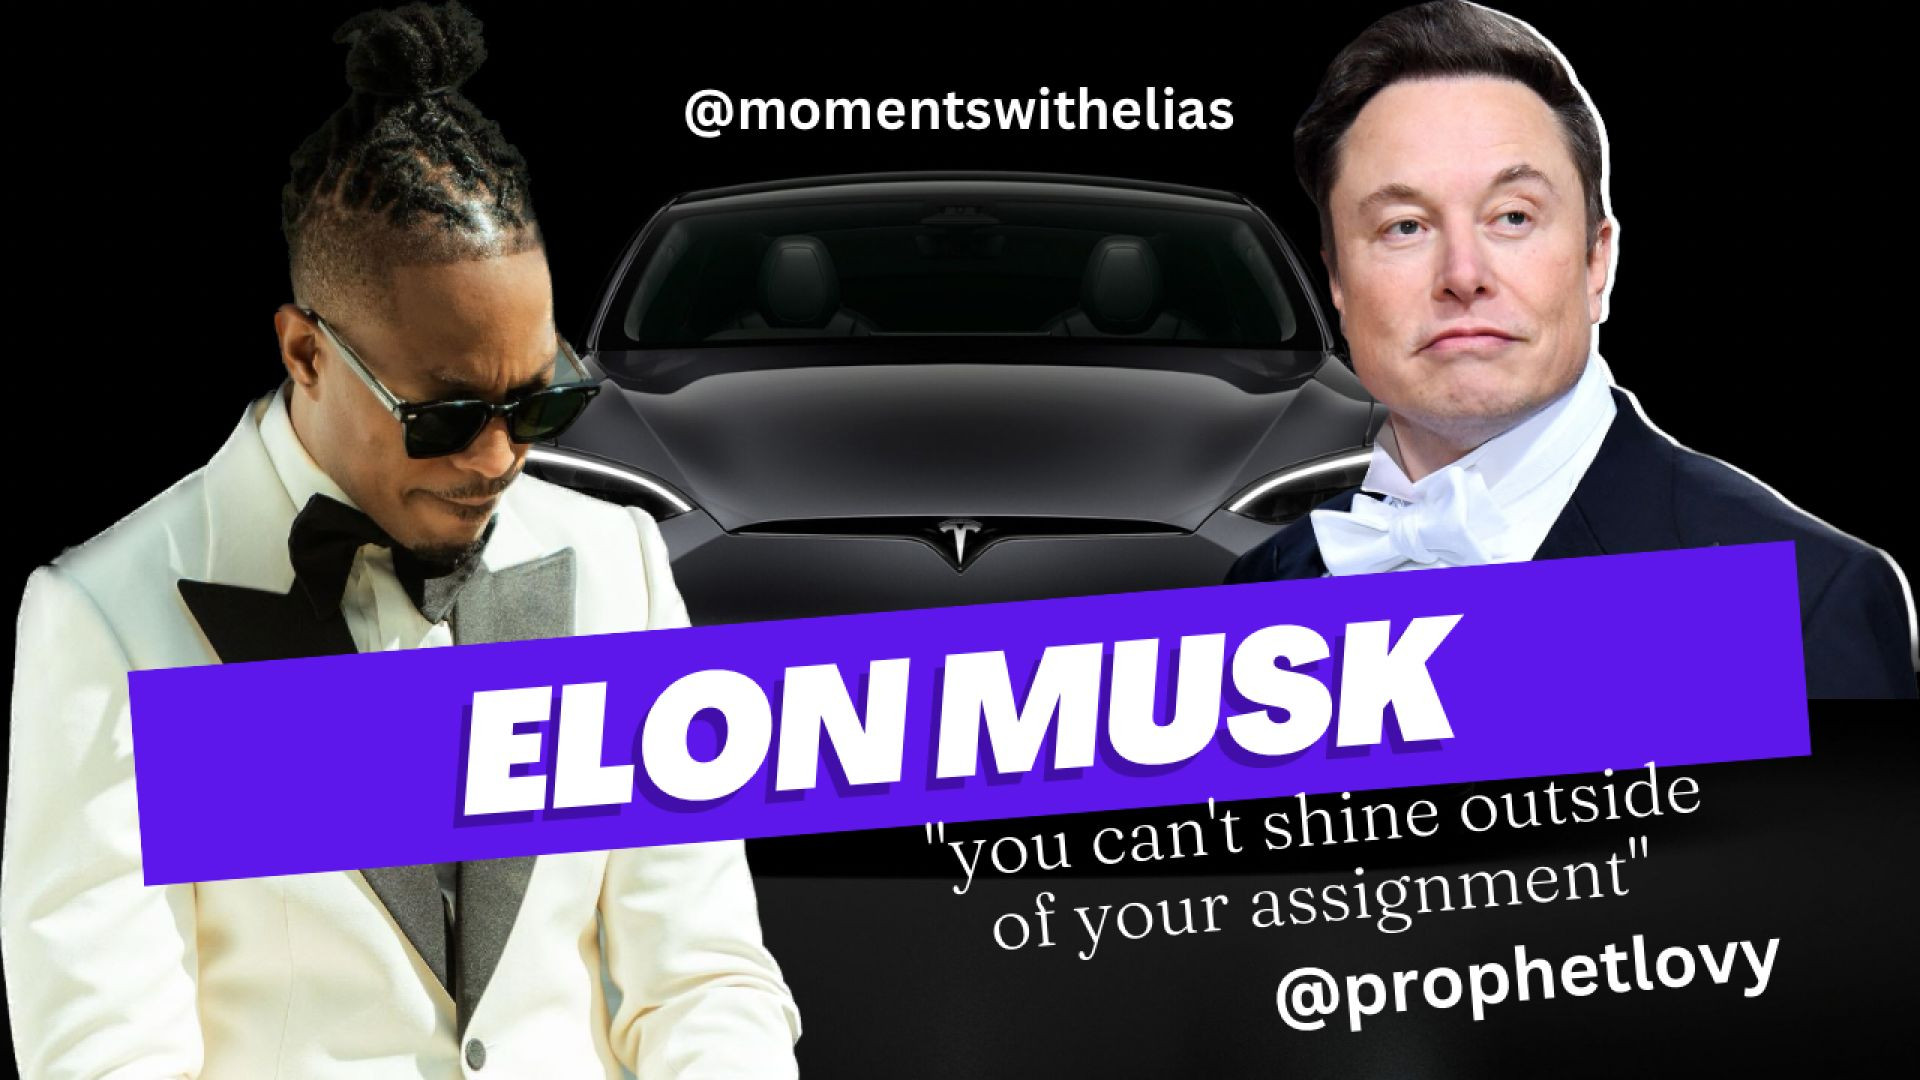 ELON MUSK / TESLA "you can't shine outside of your assignment" - Prophet Lovy L. Elia